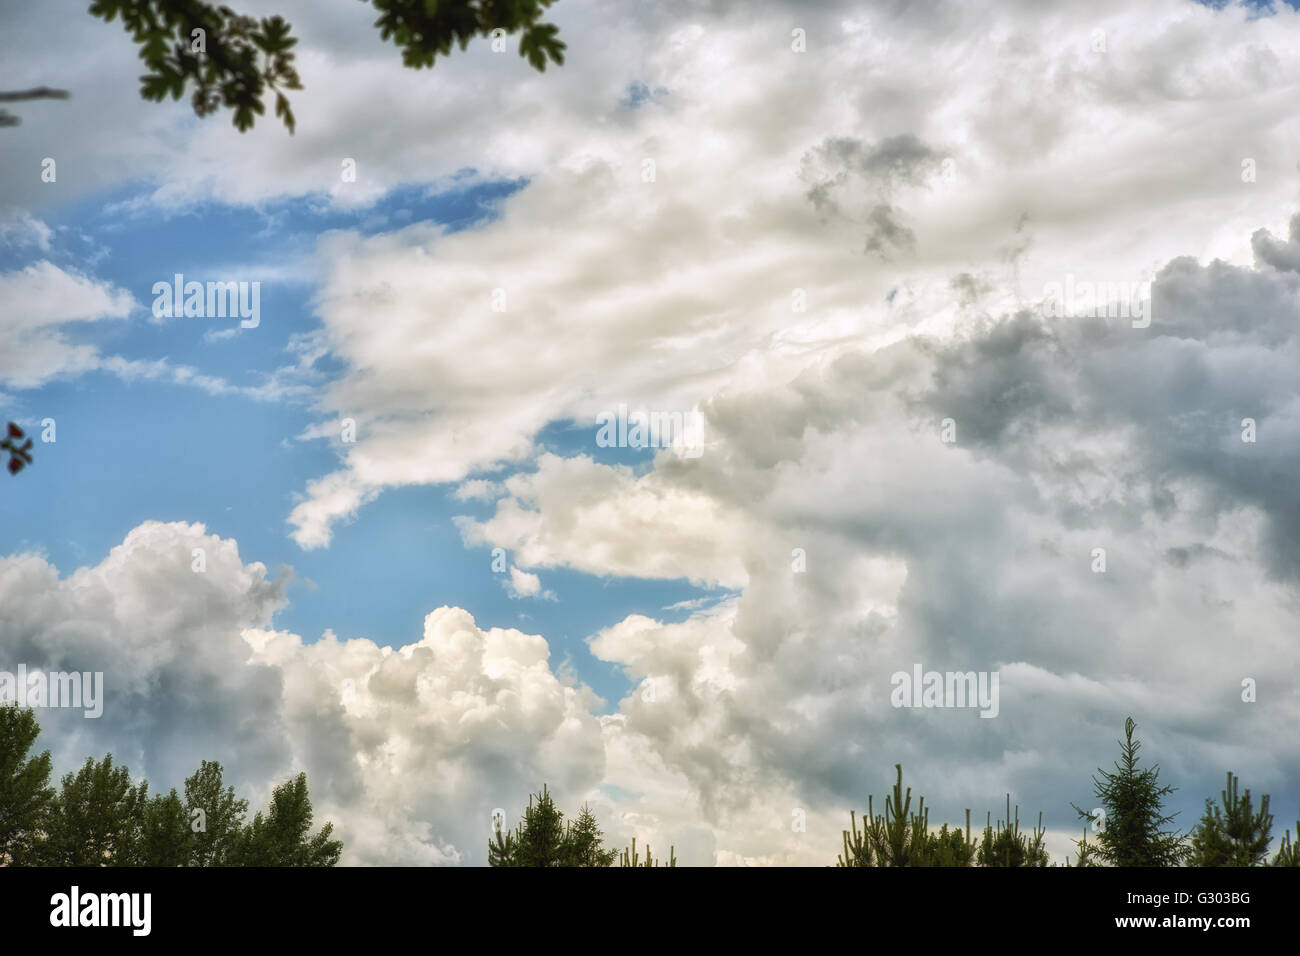 The sky before the storm. Stock Photo